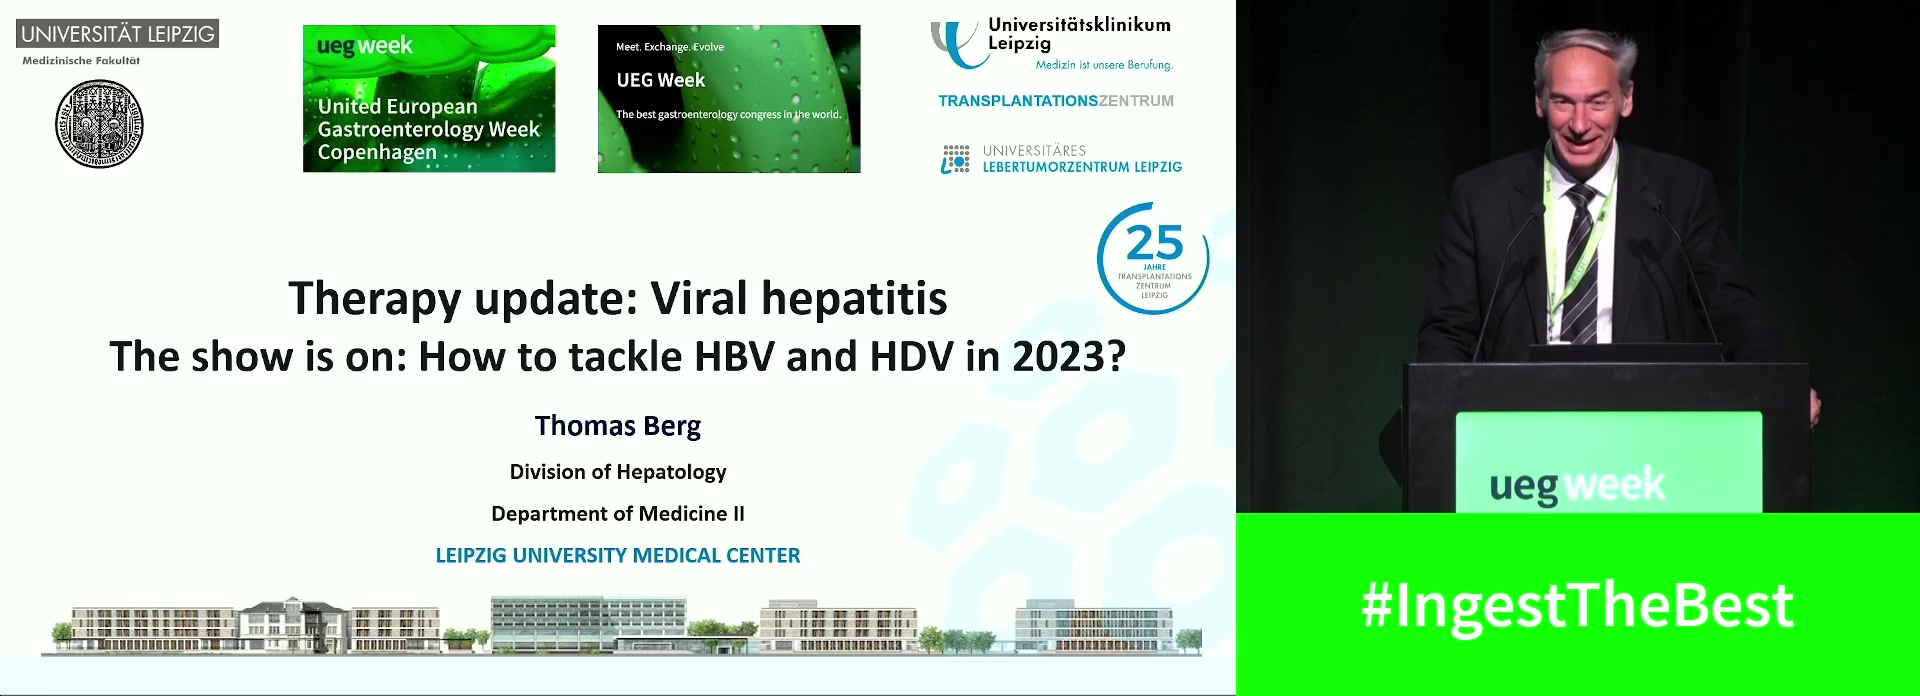 The show is on: How to tackle HBV and HDV in 2023?